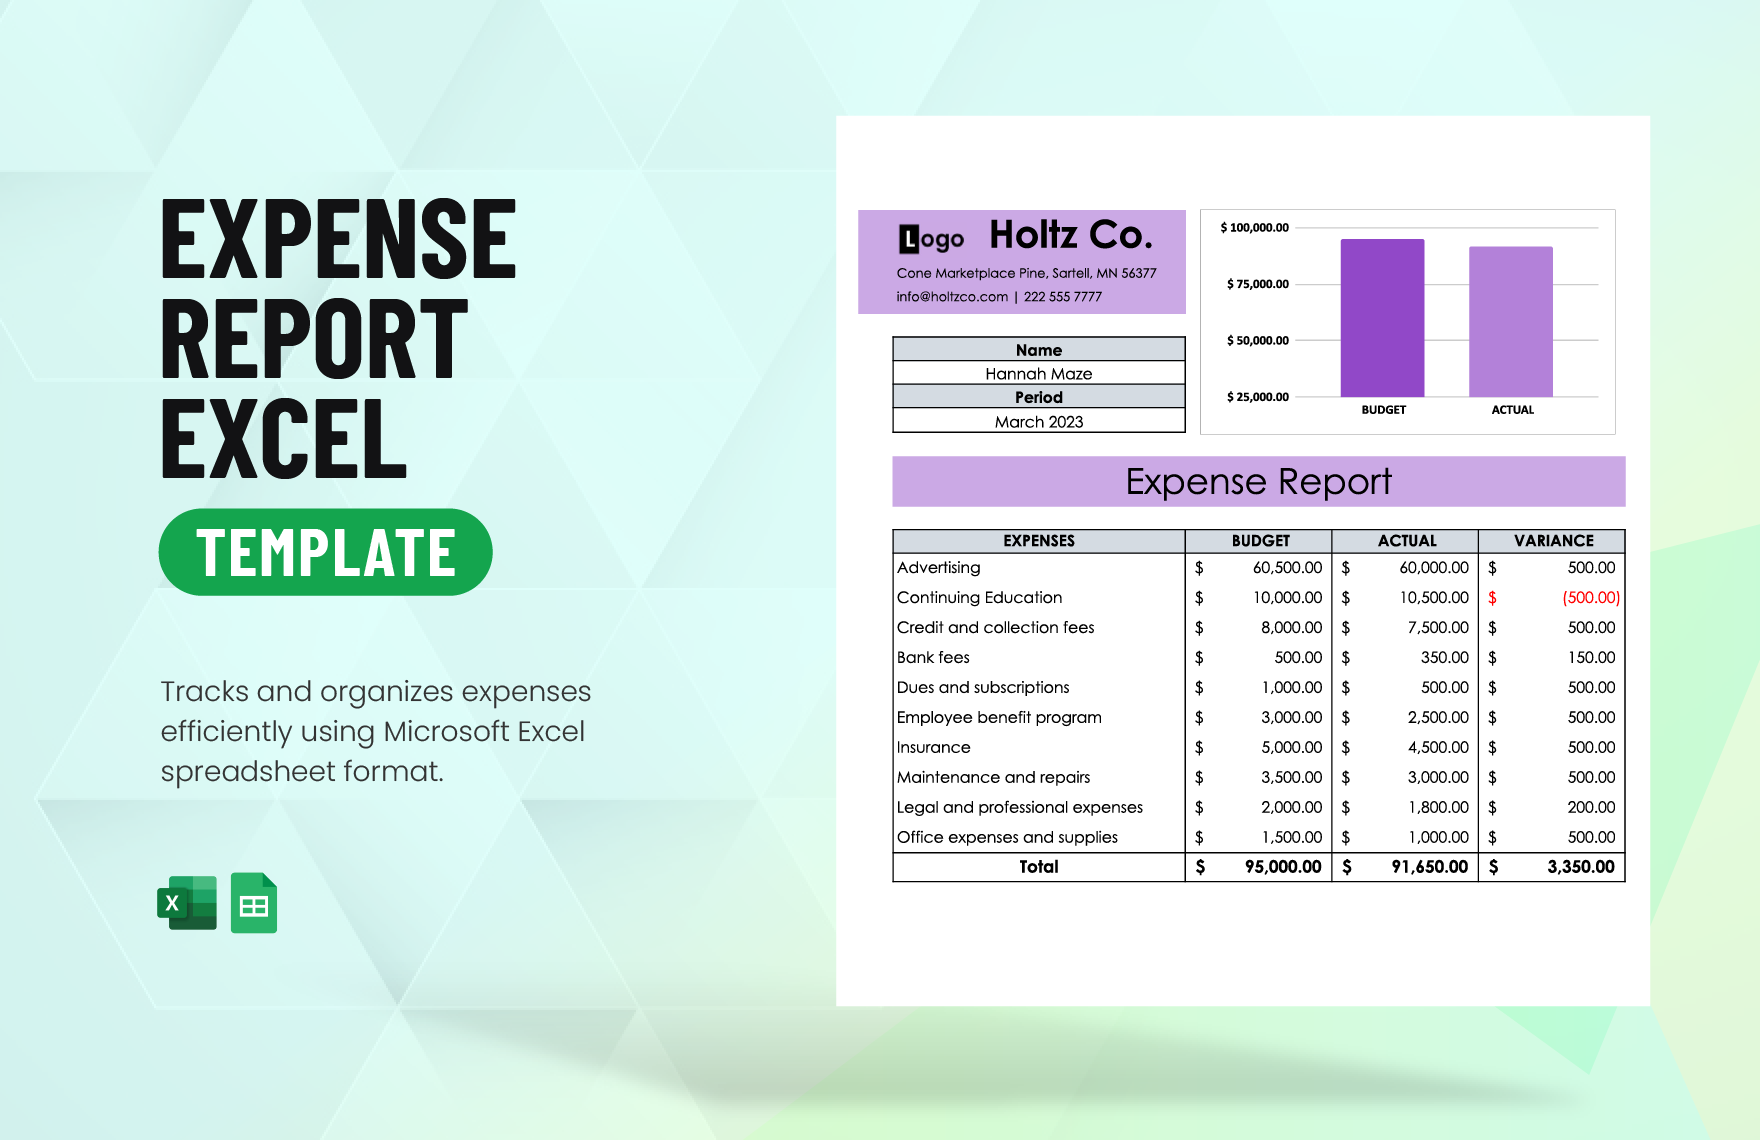 Expense Report Excel Template in Excel, Google Sheets